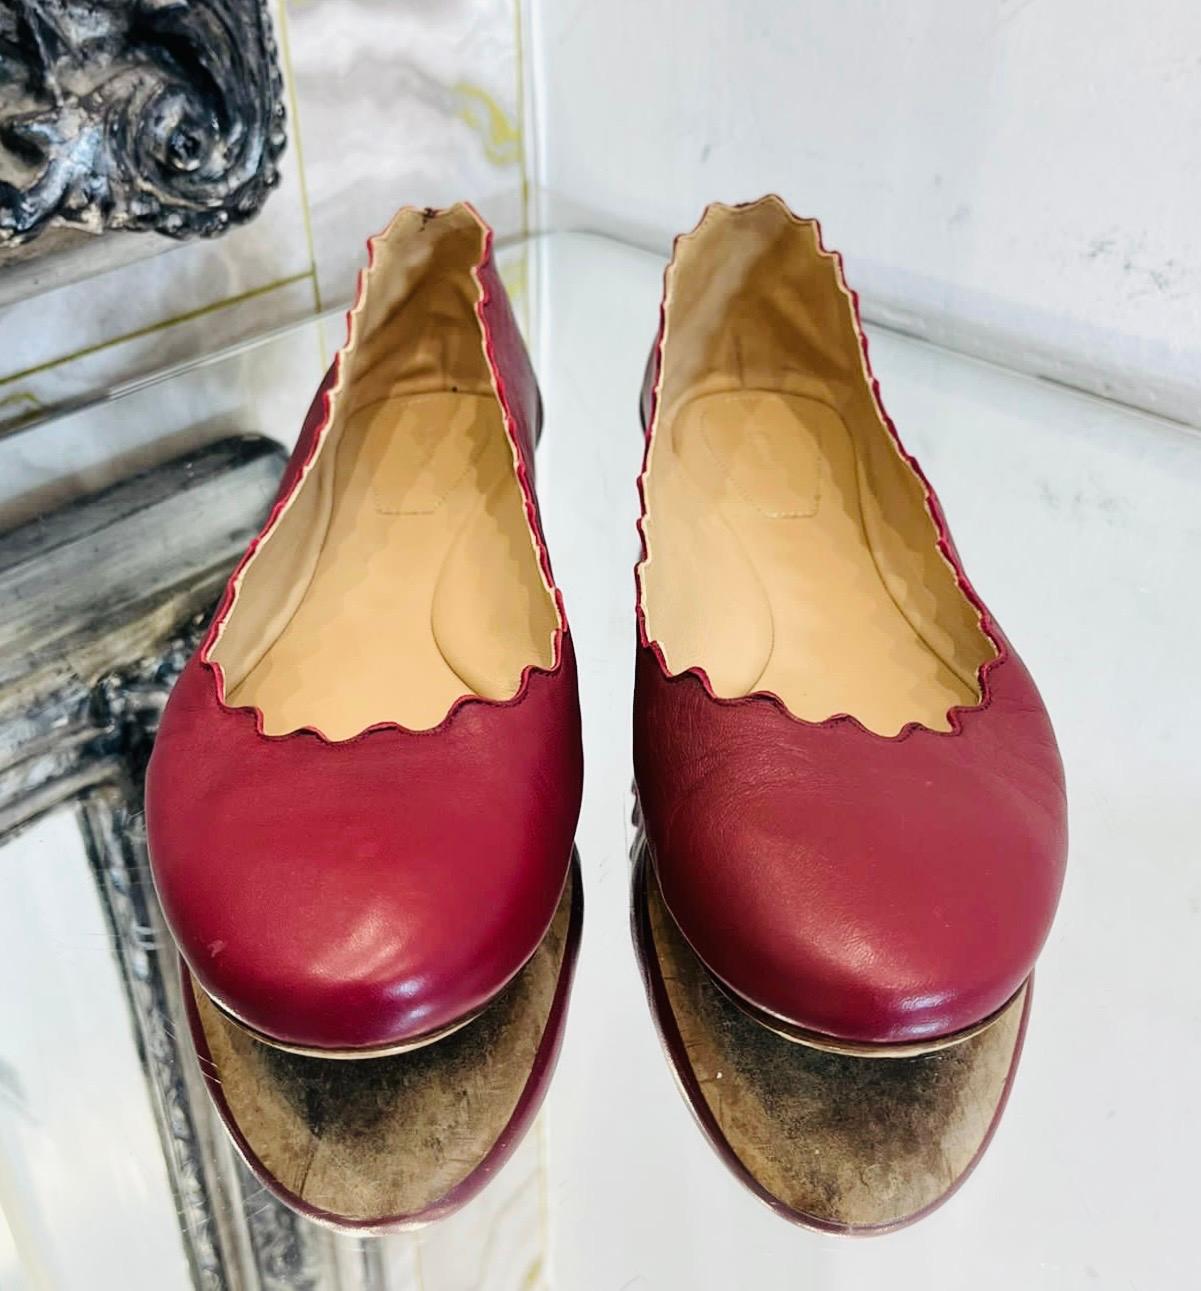 Chloe Leather Ballerina Flats

Burgundy 'Lauren' ballerinas designed with scalloped trim.

Featuring almond toe, short heel and leather insoles and soles. Rrp £420

Size – 37

Condition – Very Good (Small signs of wear, not visible while